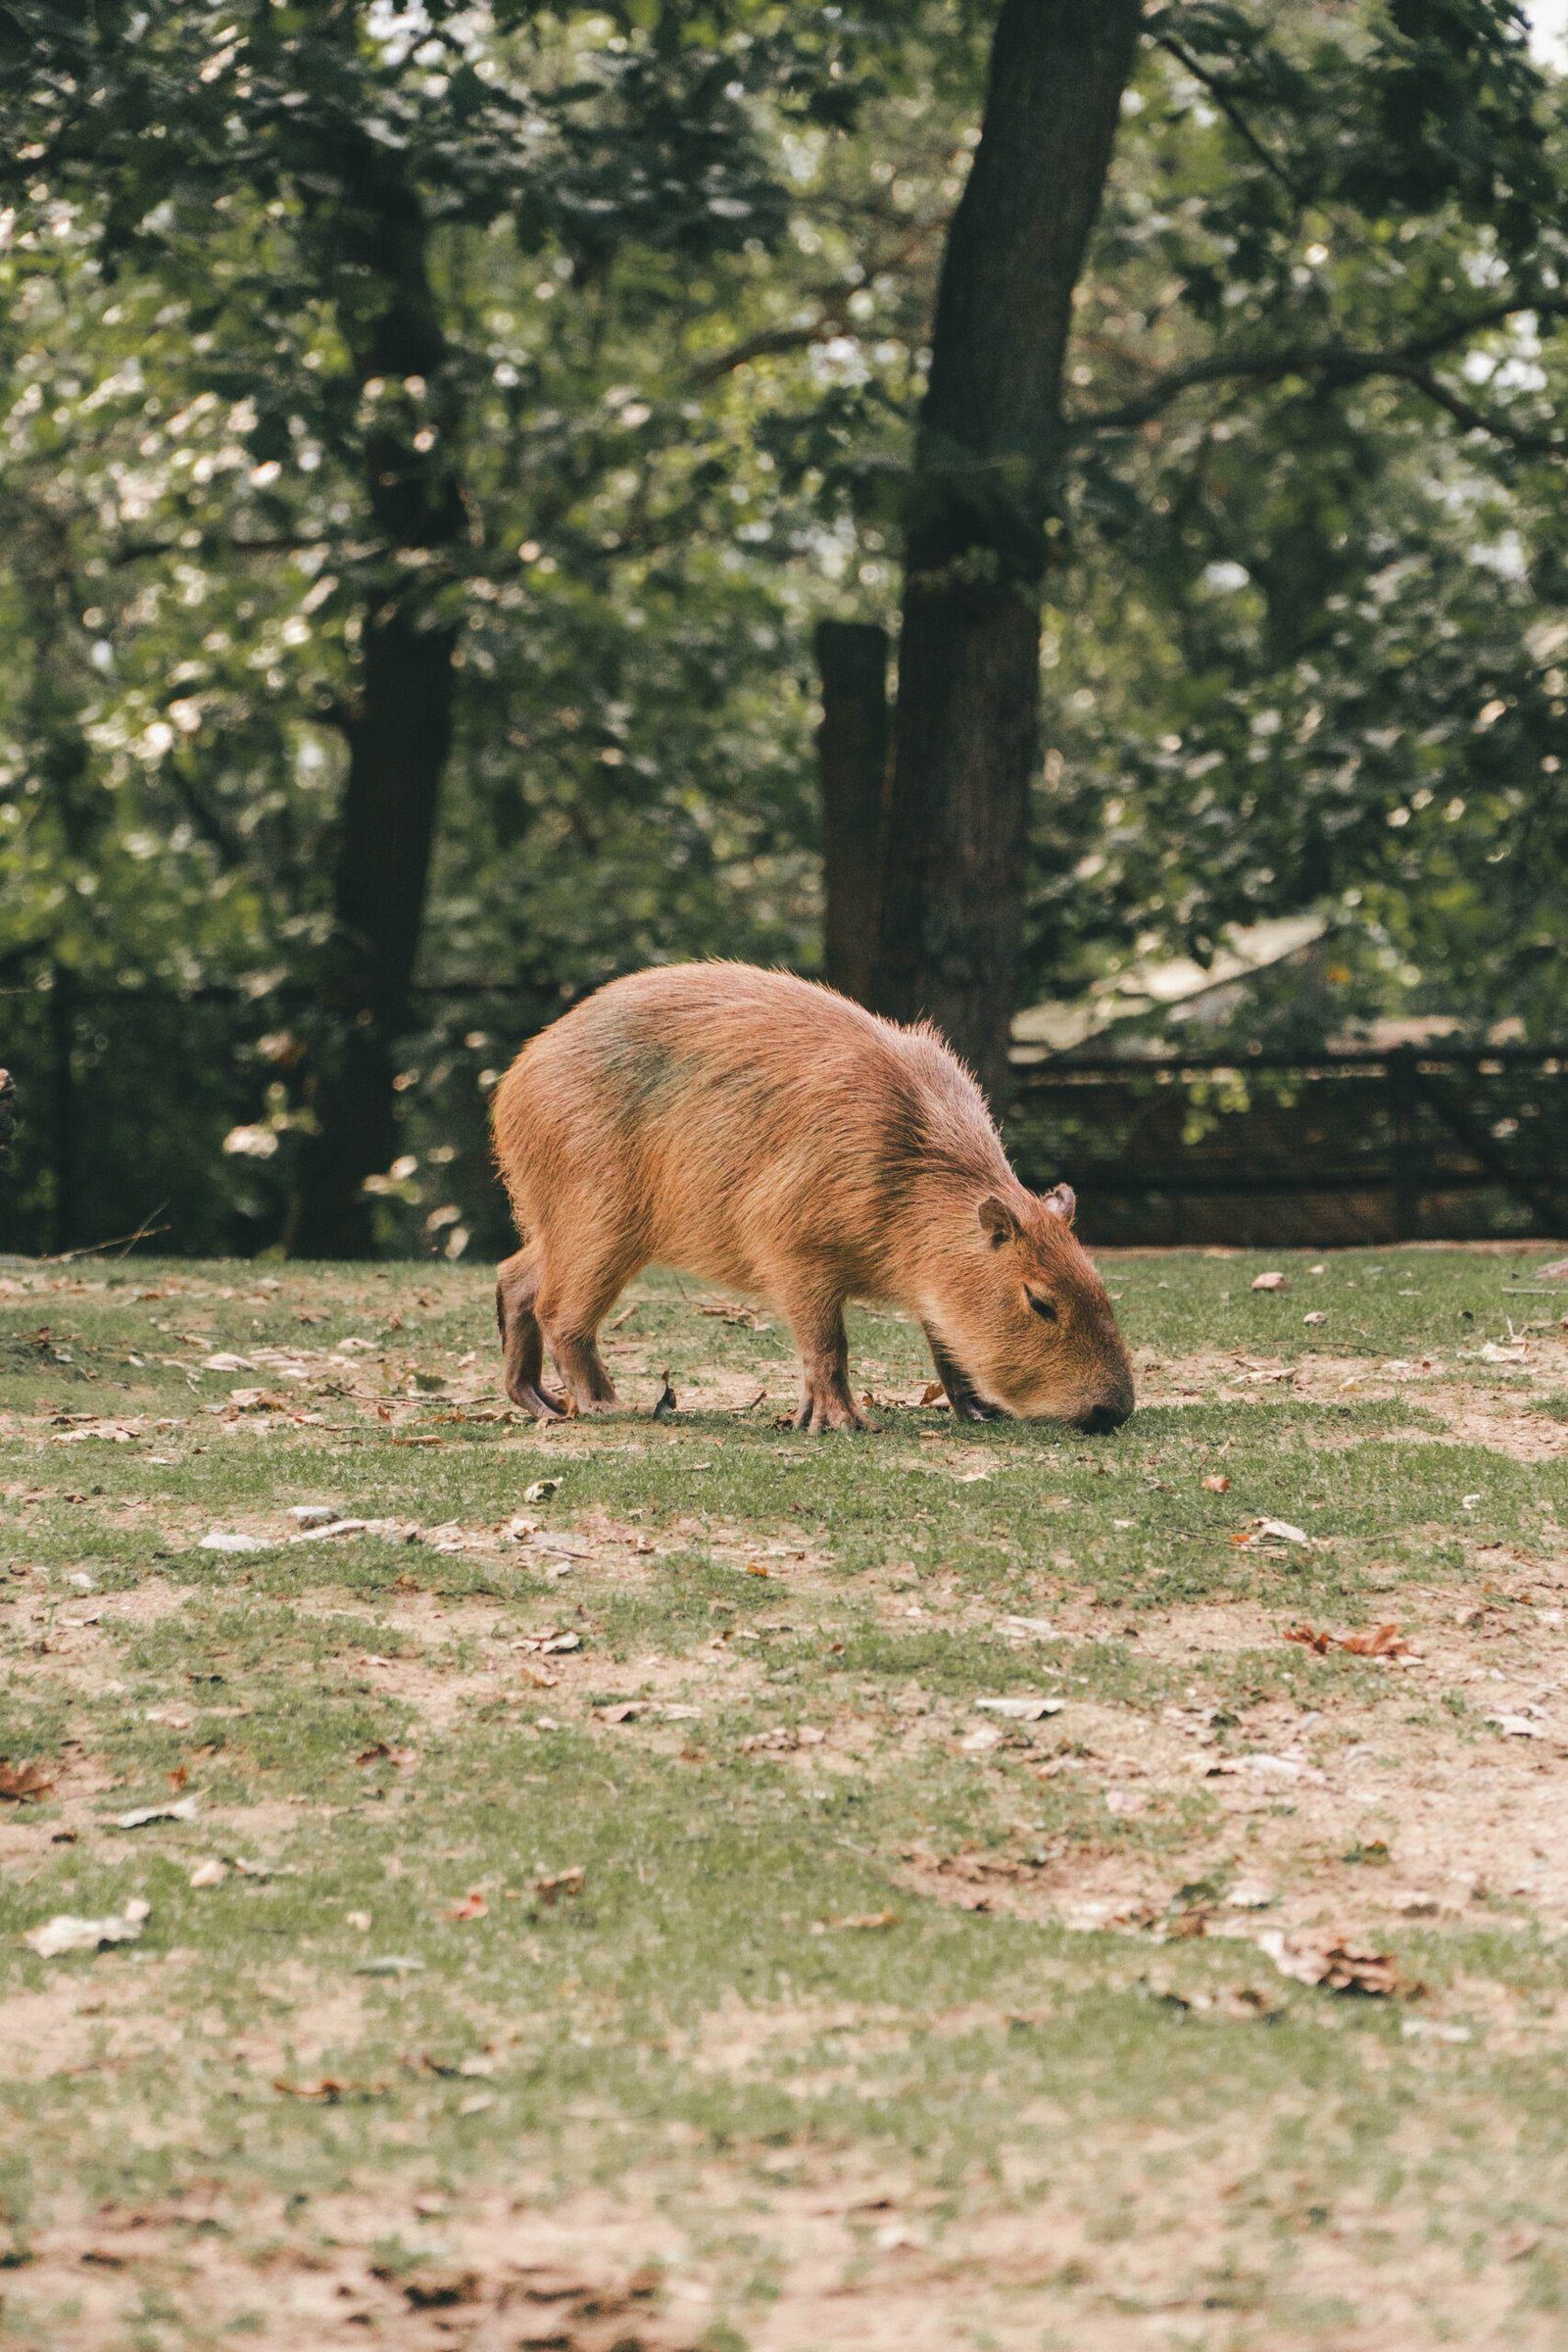 Why do people eat capybaras?